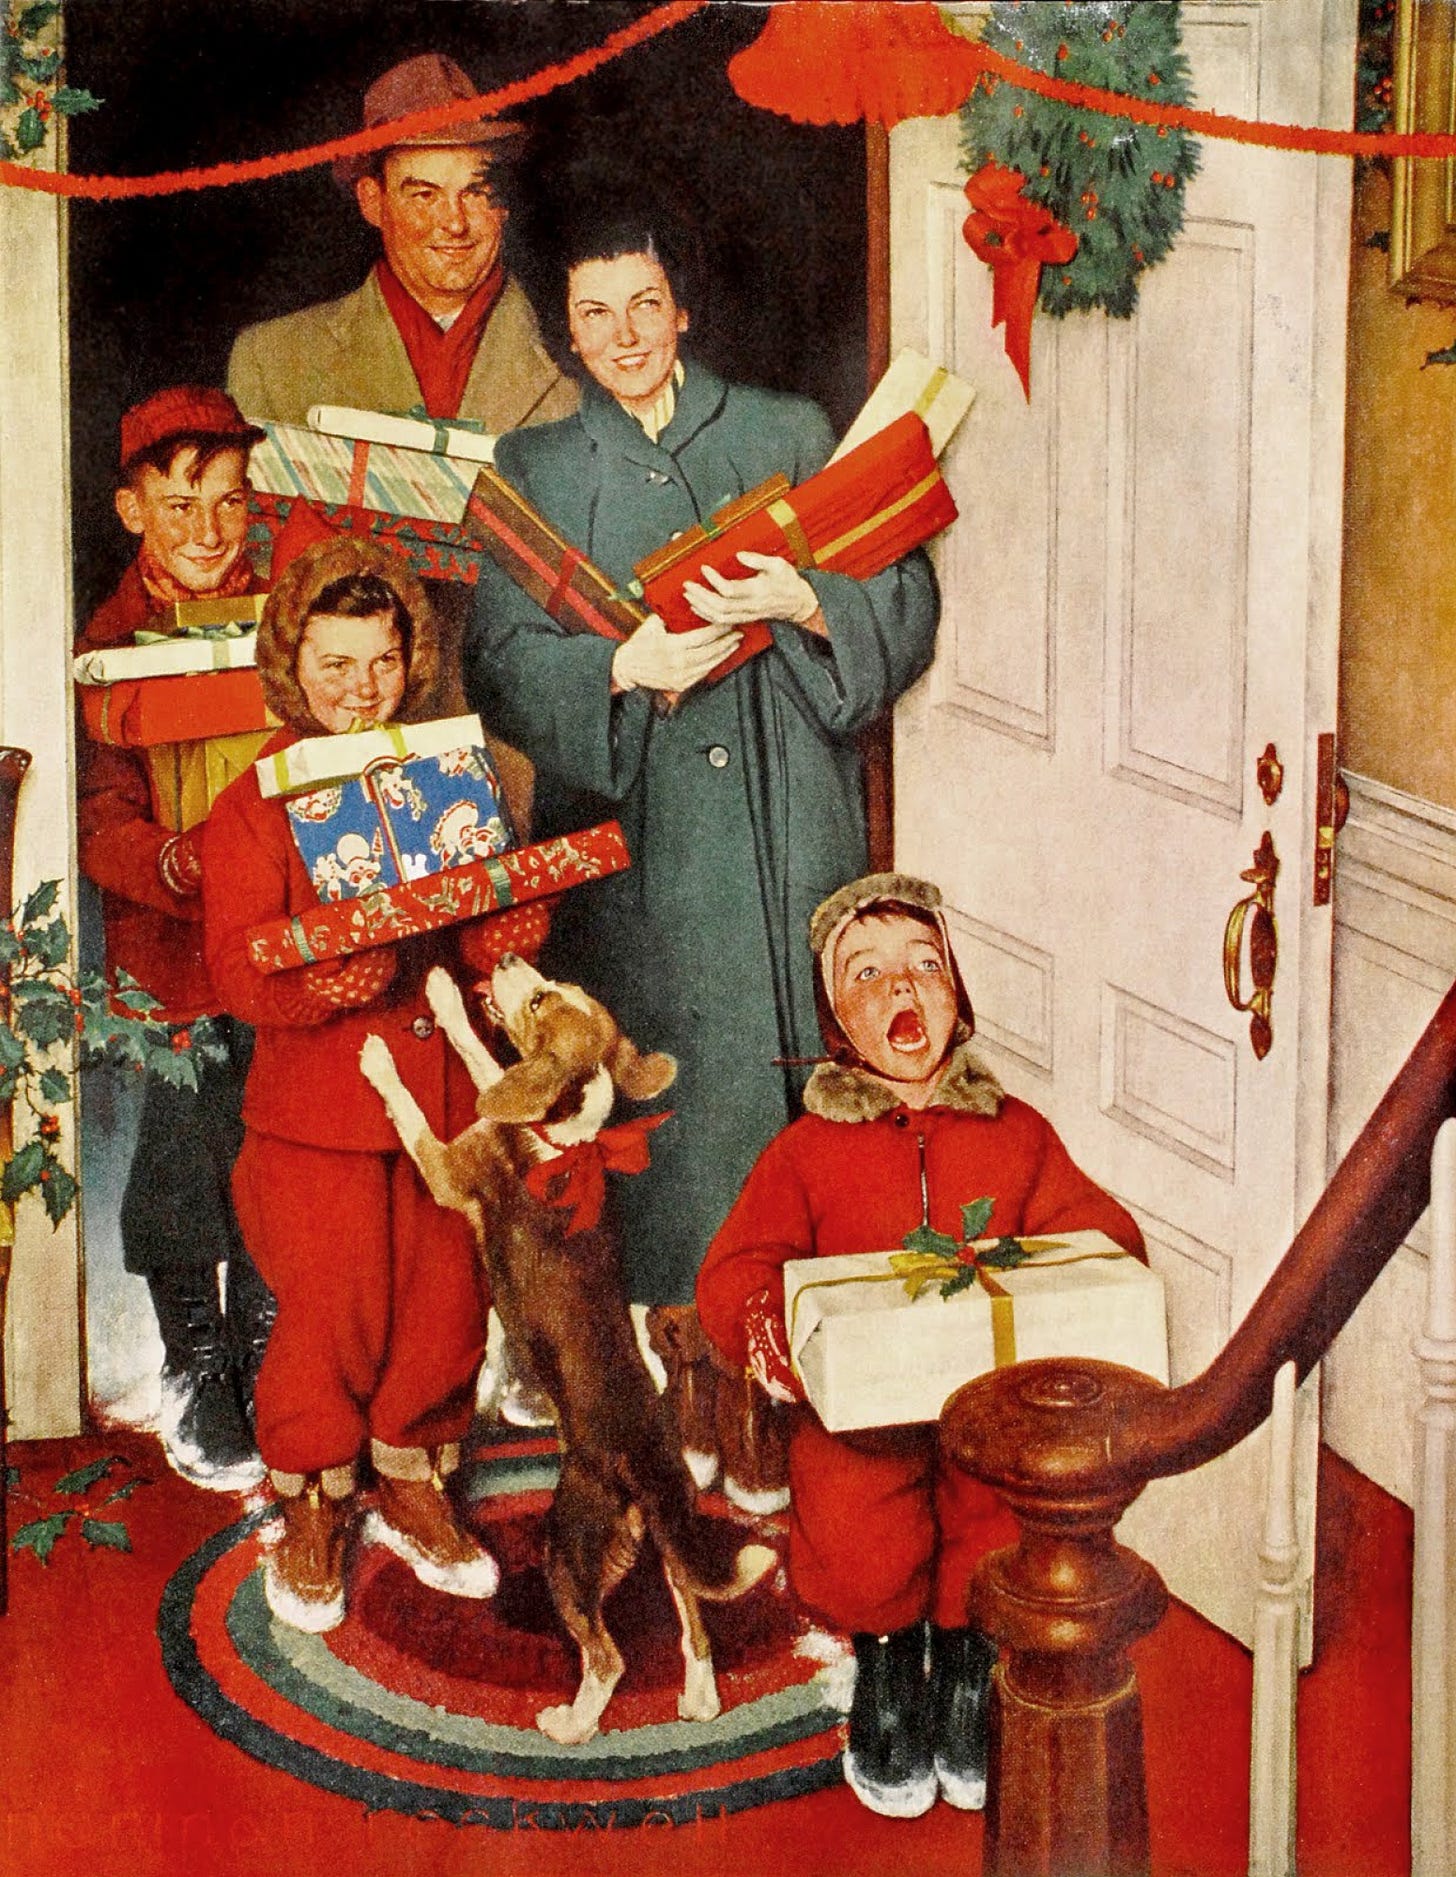 A happy family arrives for Christmas bearing presents.